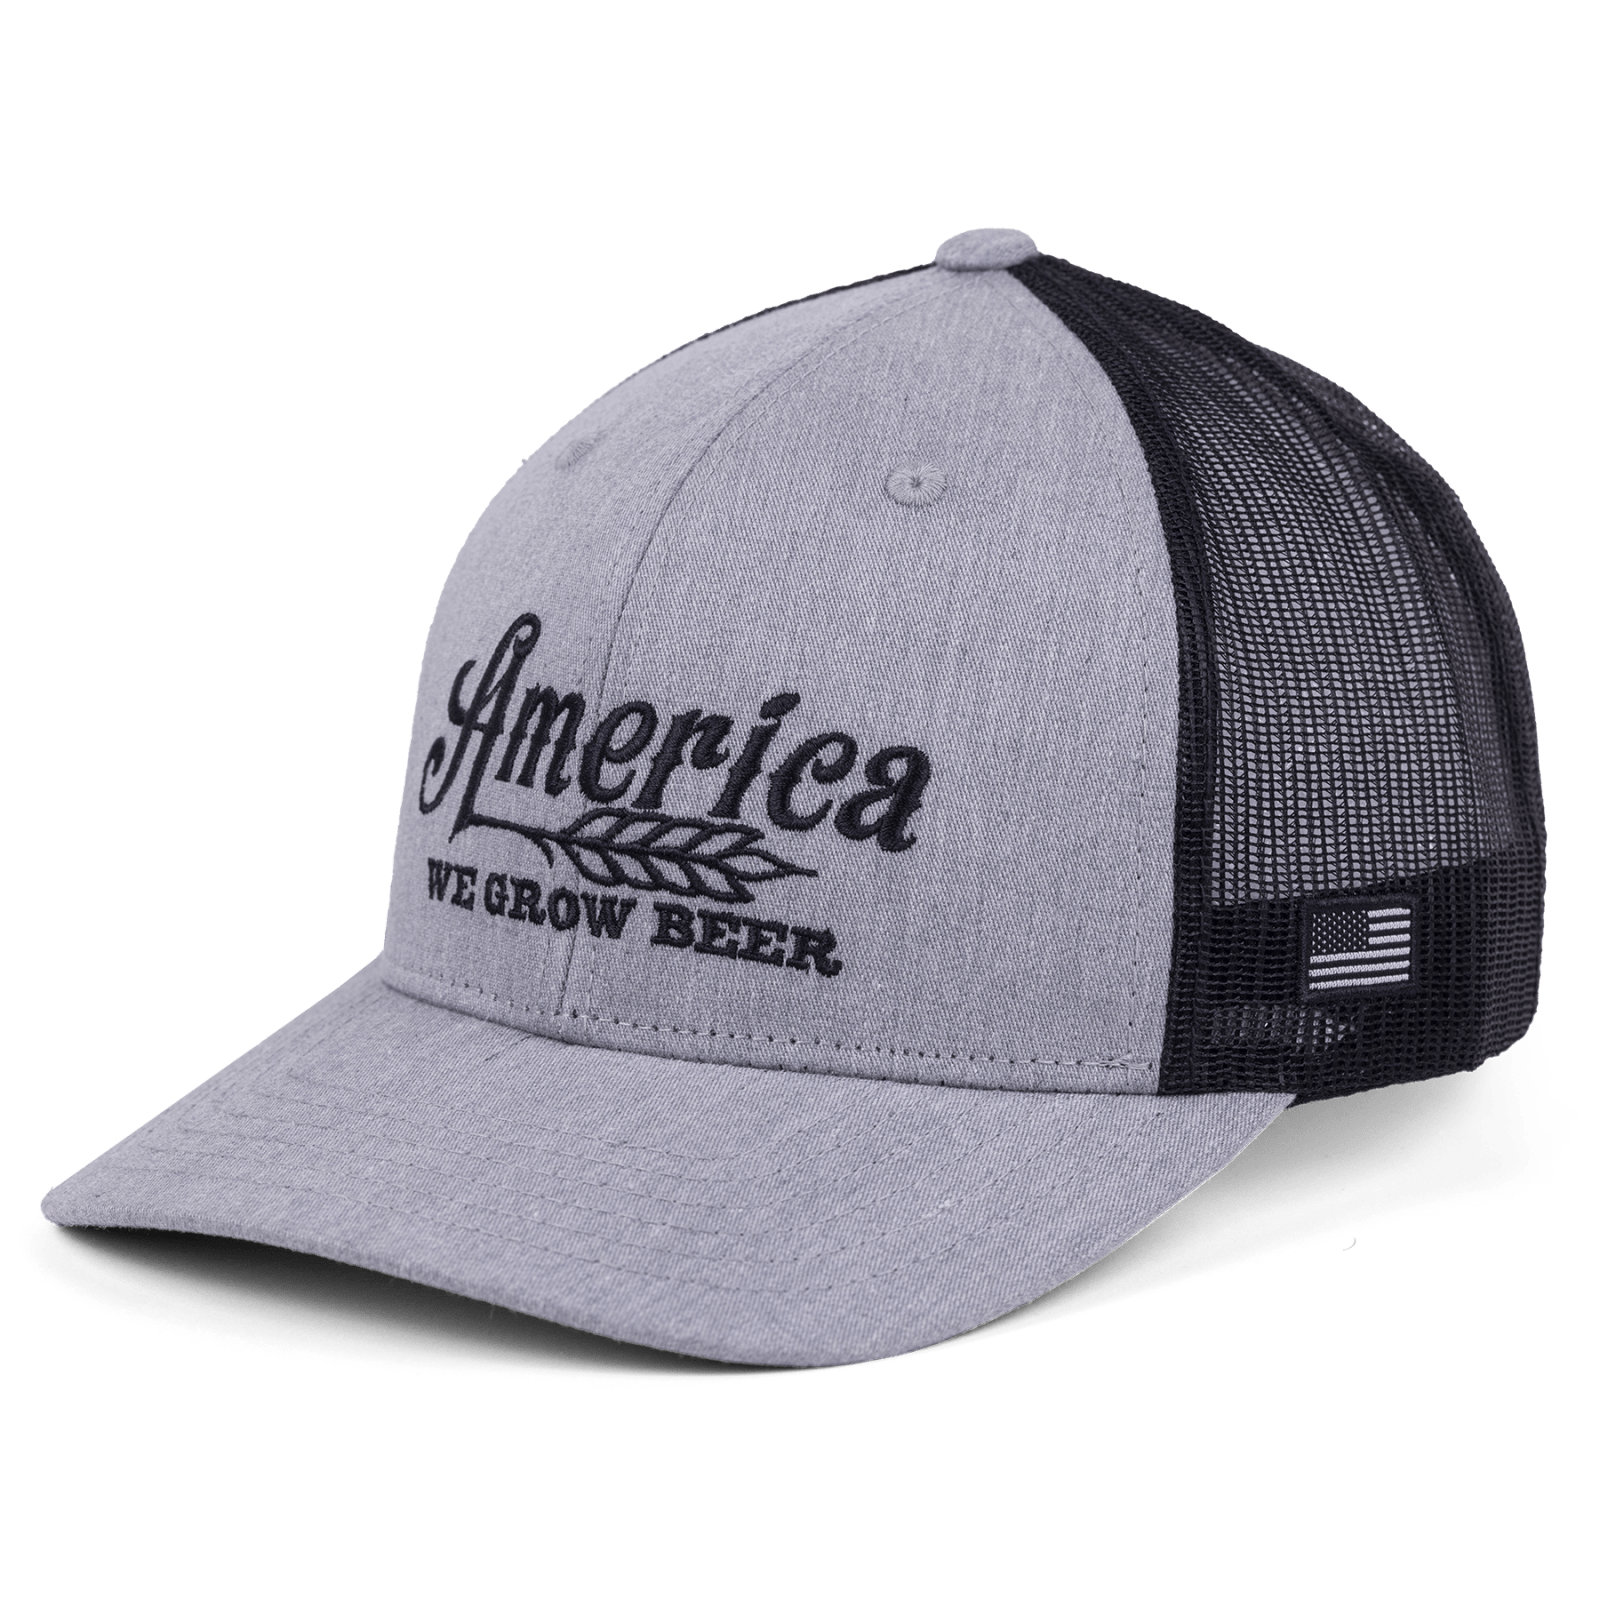 Rural Cloth Hats We Grow Beer Embroidered Hat-Gray/Black